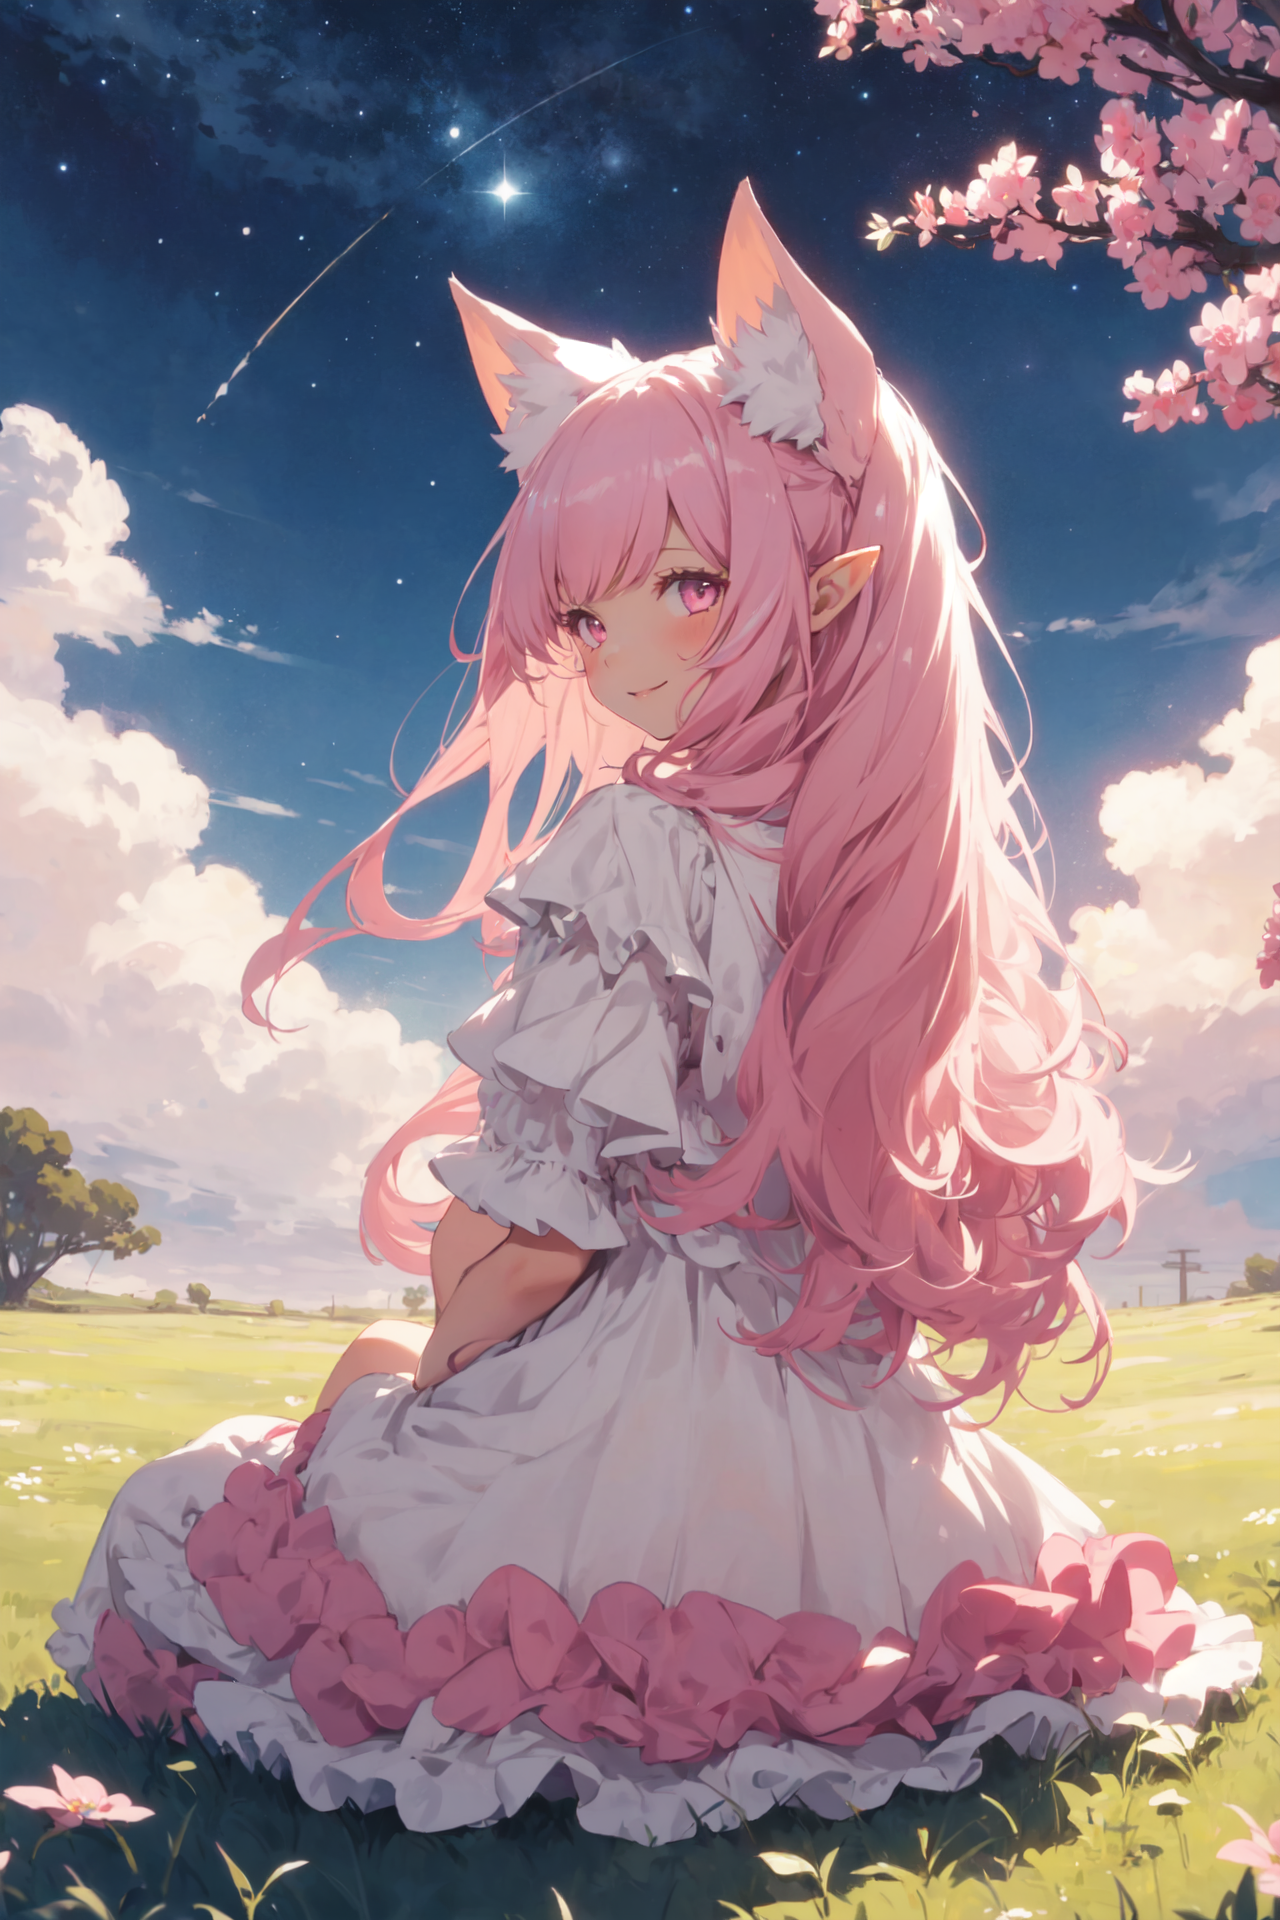 Flowy Natural Wavy Anime Messy Hair Pink